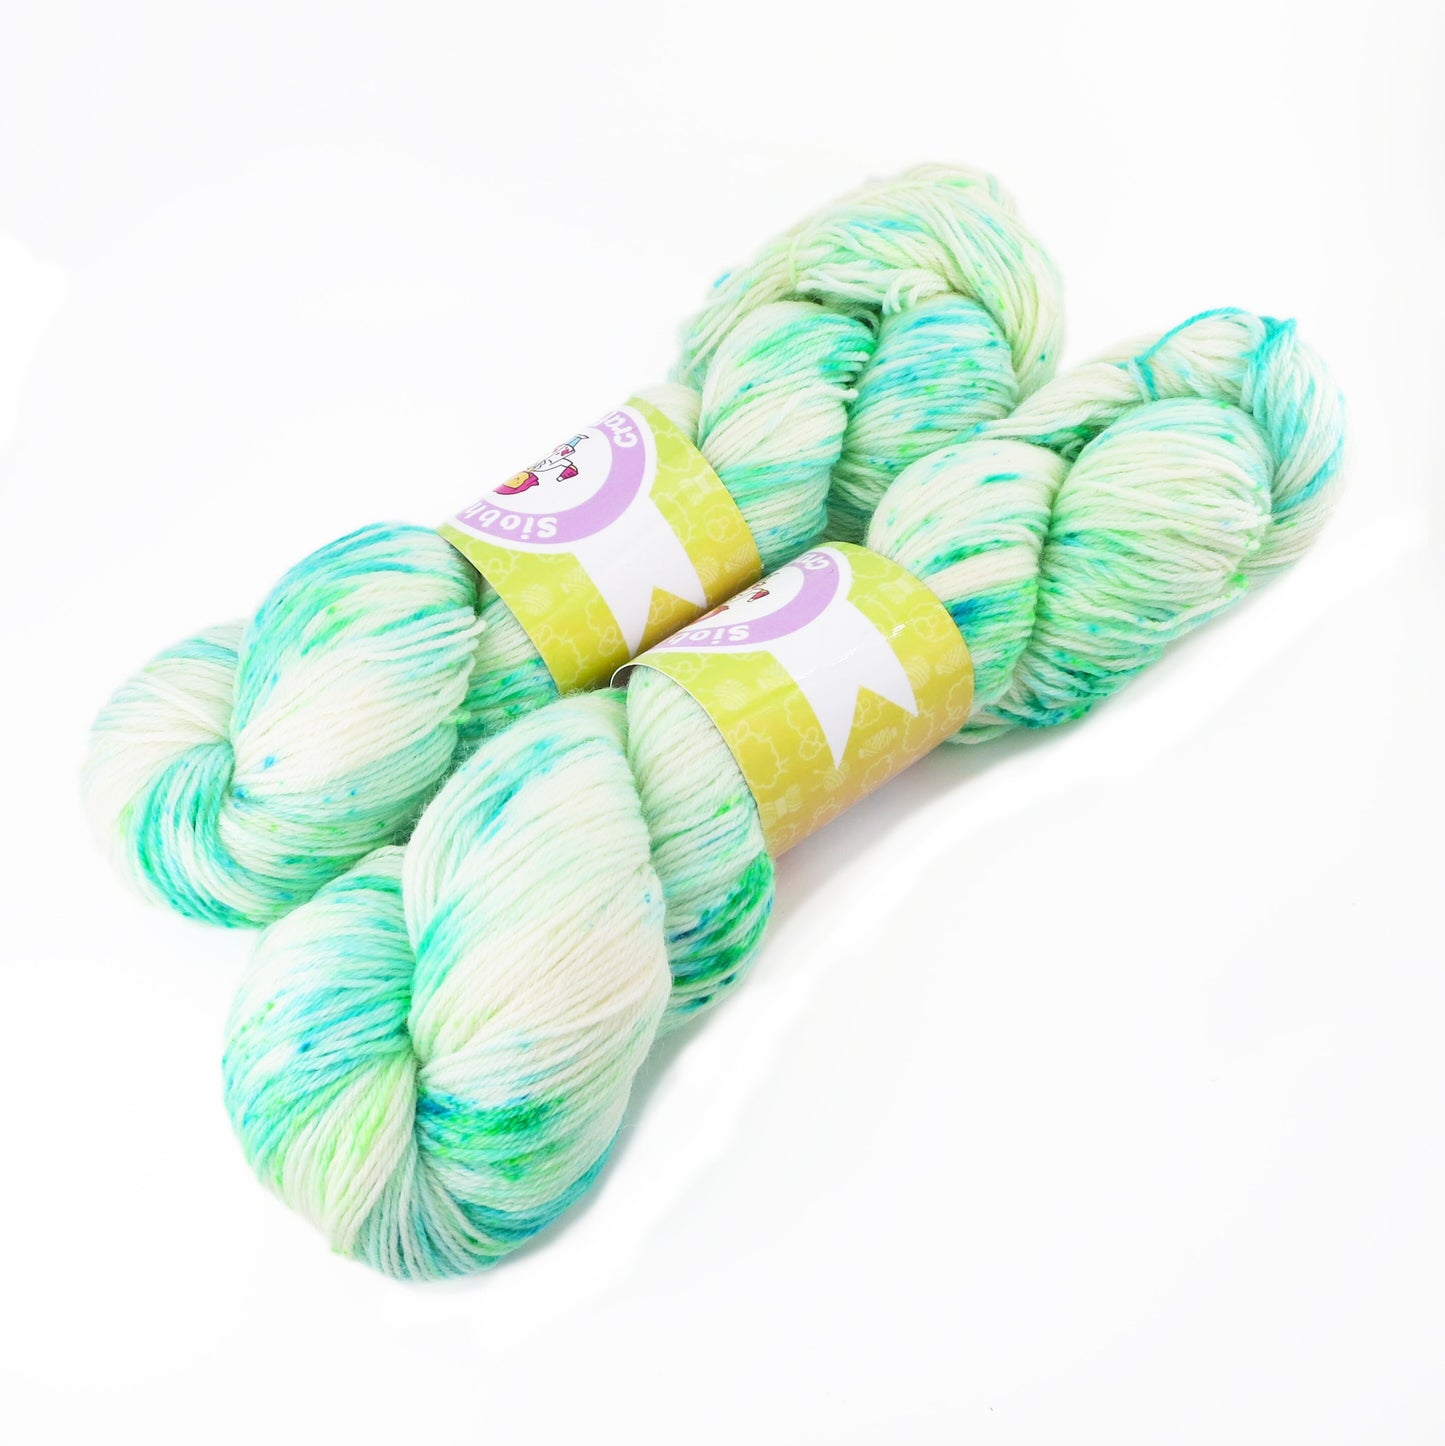 Hand Dyed Sock Yarn "Ocean Pearl" - 4 Ply / Fingering Weight